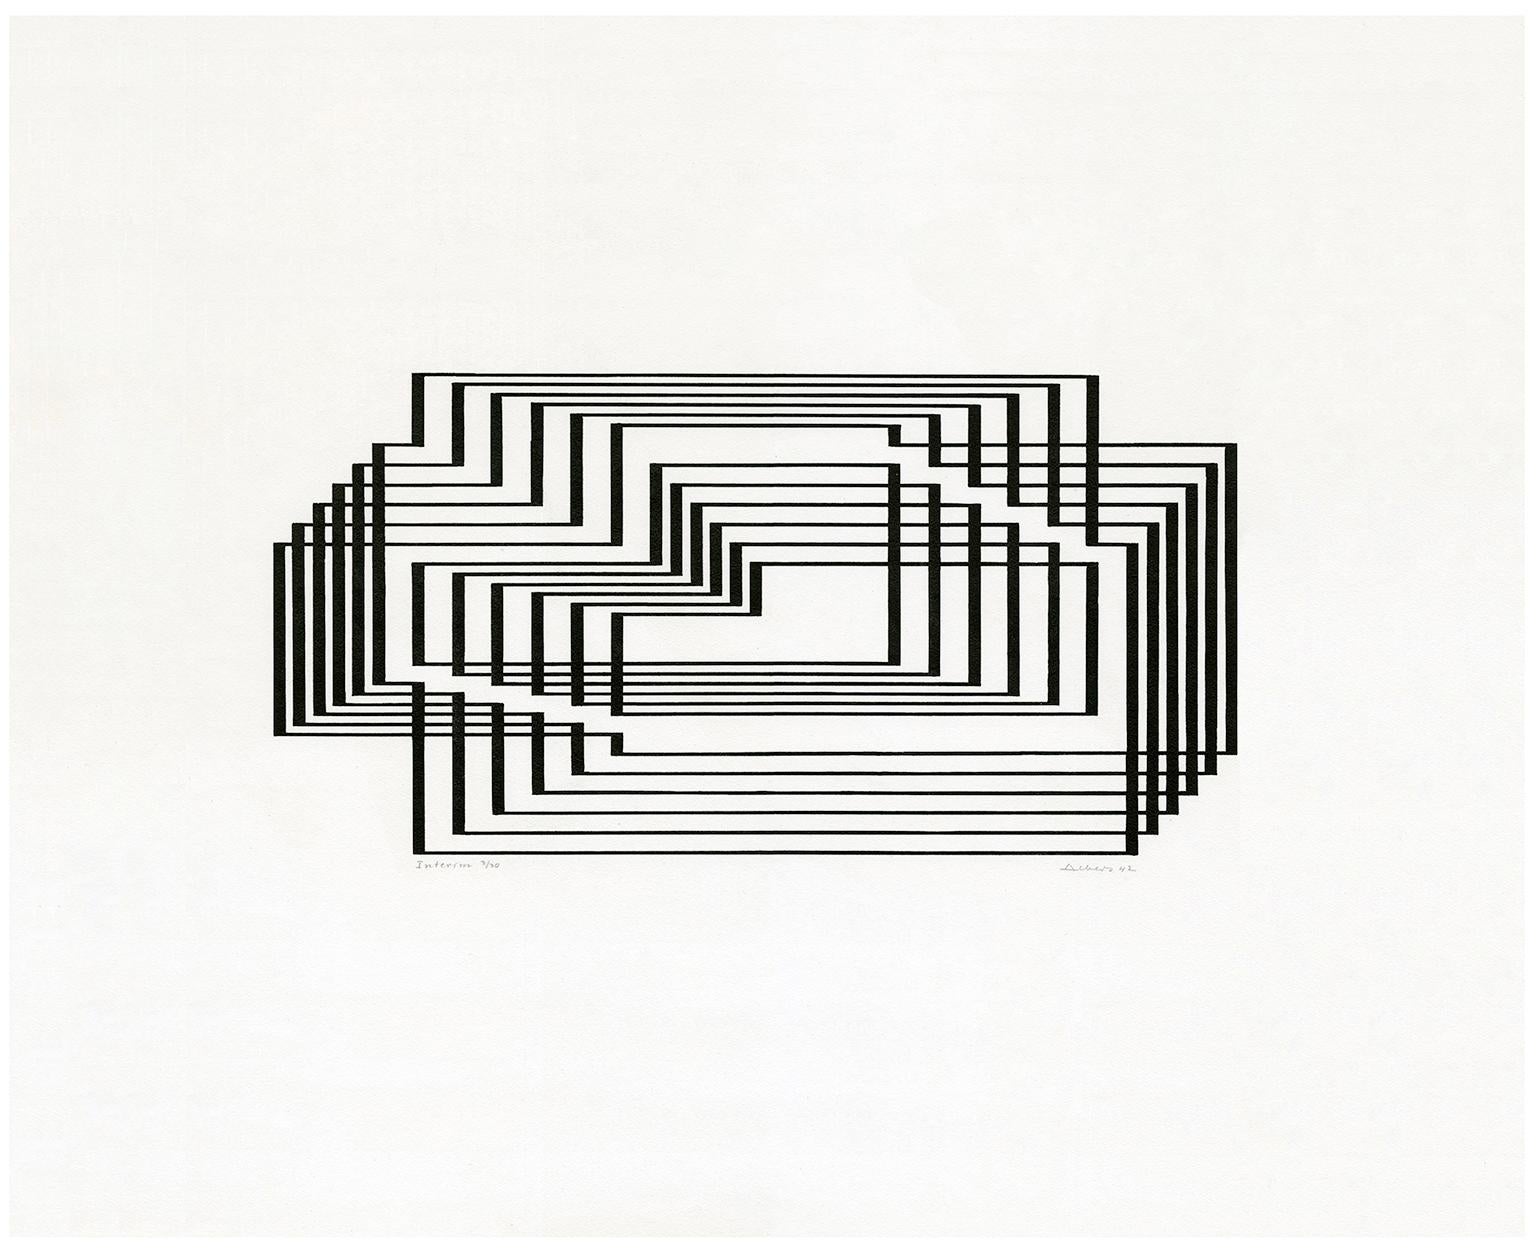 'Interim' from the series 'Graphic Tectonics' —Mid-Century Geometric Abstraction - Print by Josef Albers